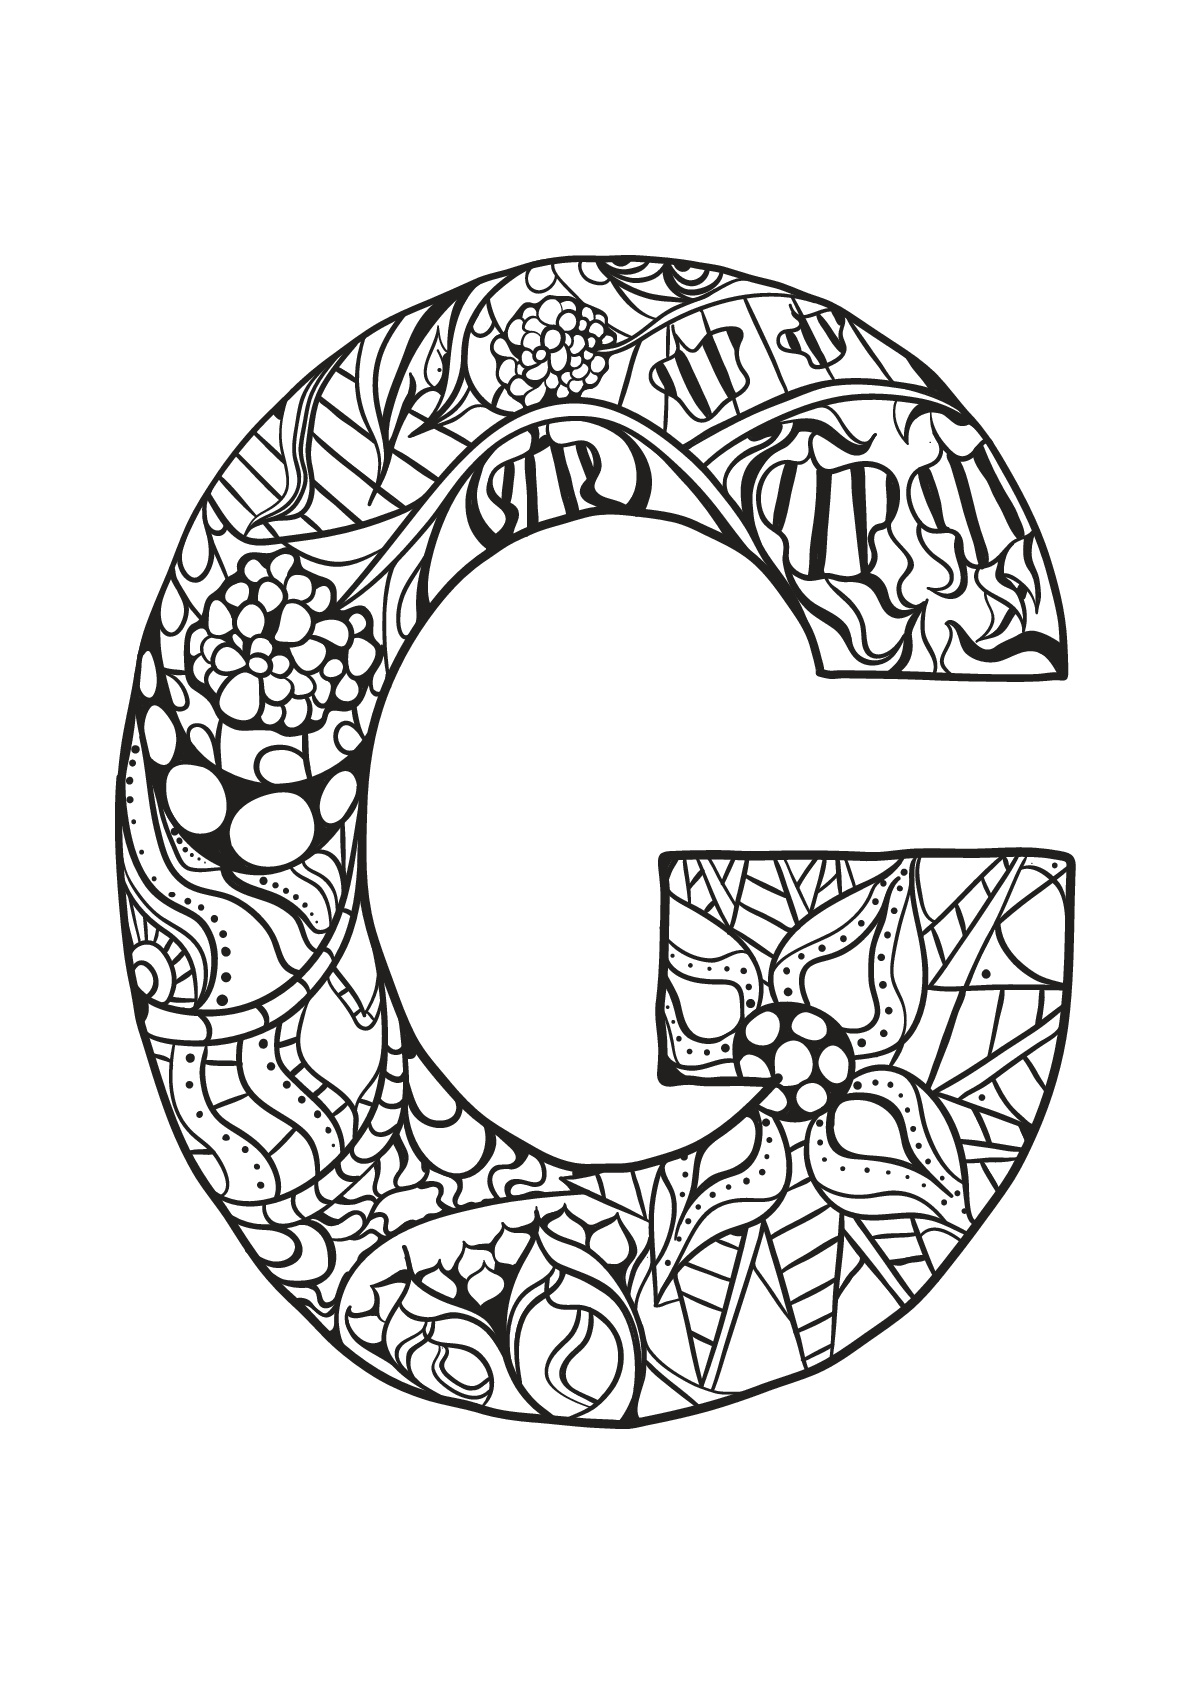 Download Alphabet to download for free : G - Alphabet Kids Coloring Pages